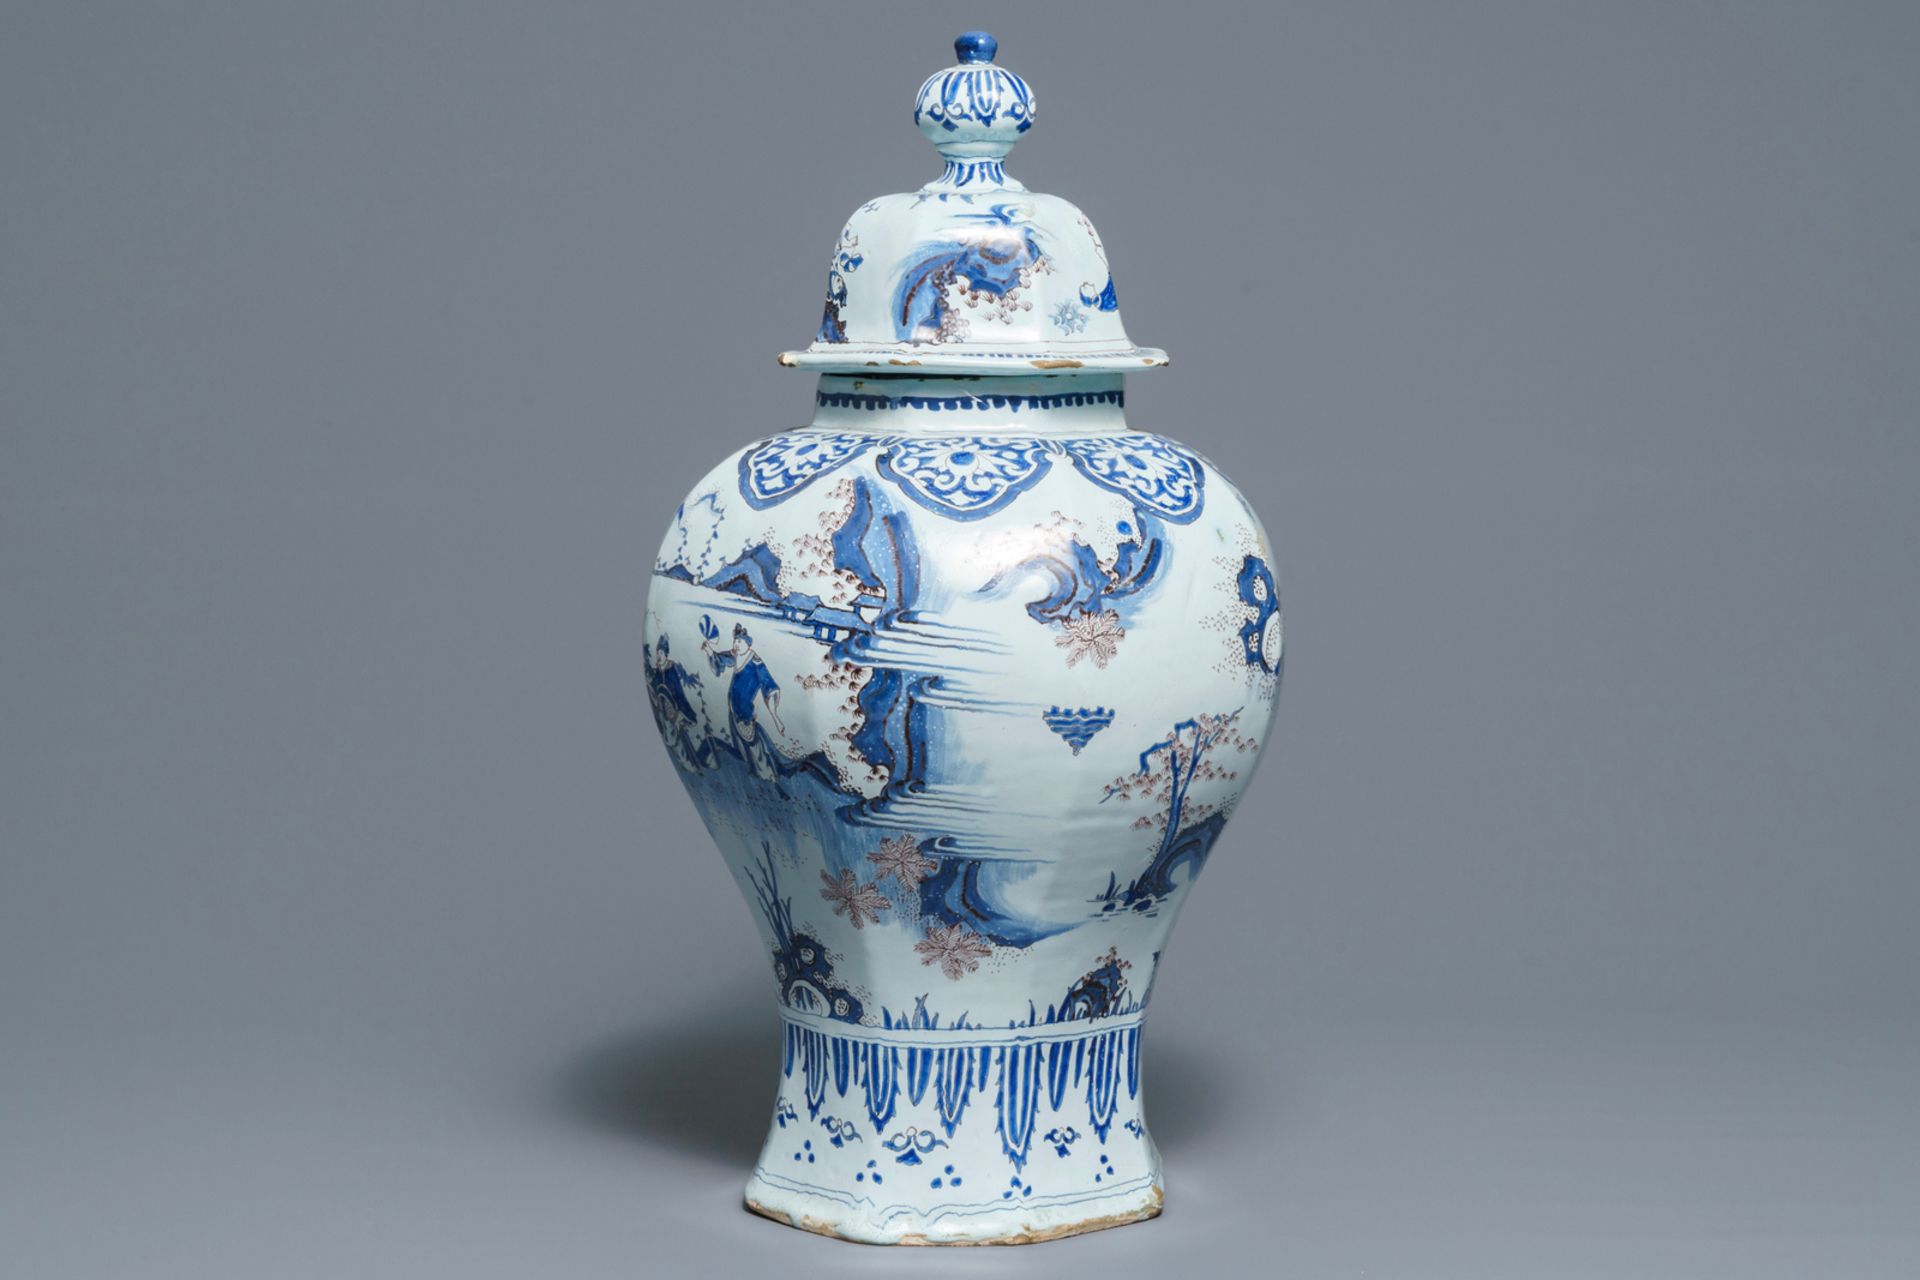 A large blue, white and manganese octagonal chinoiserie vase and cover, Nevers, 18th C. - Image 4 of 7